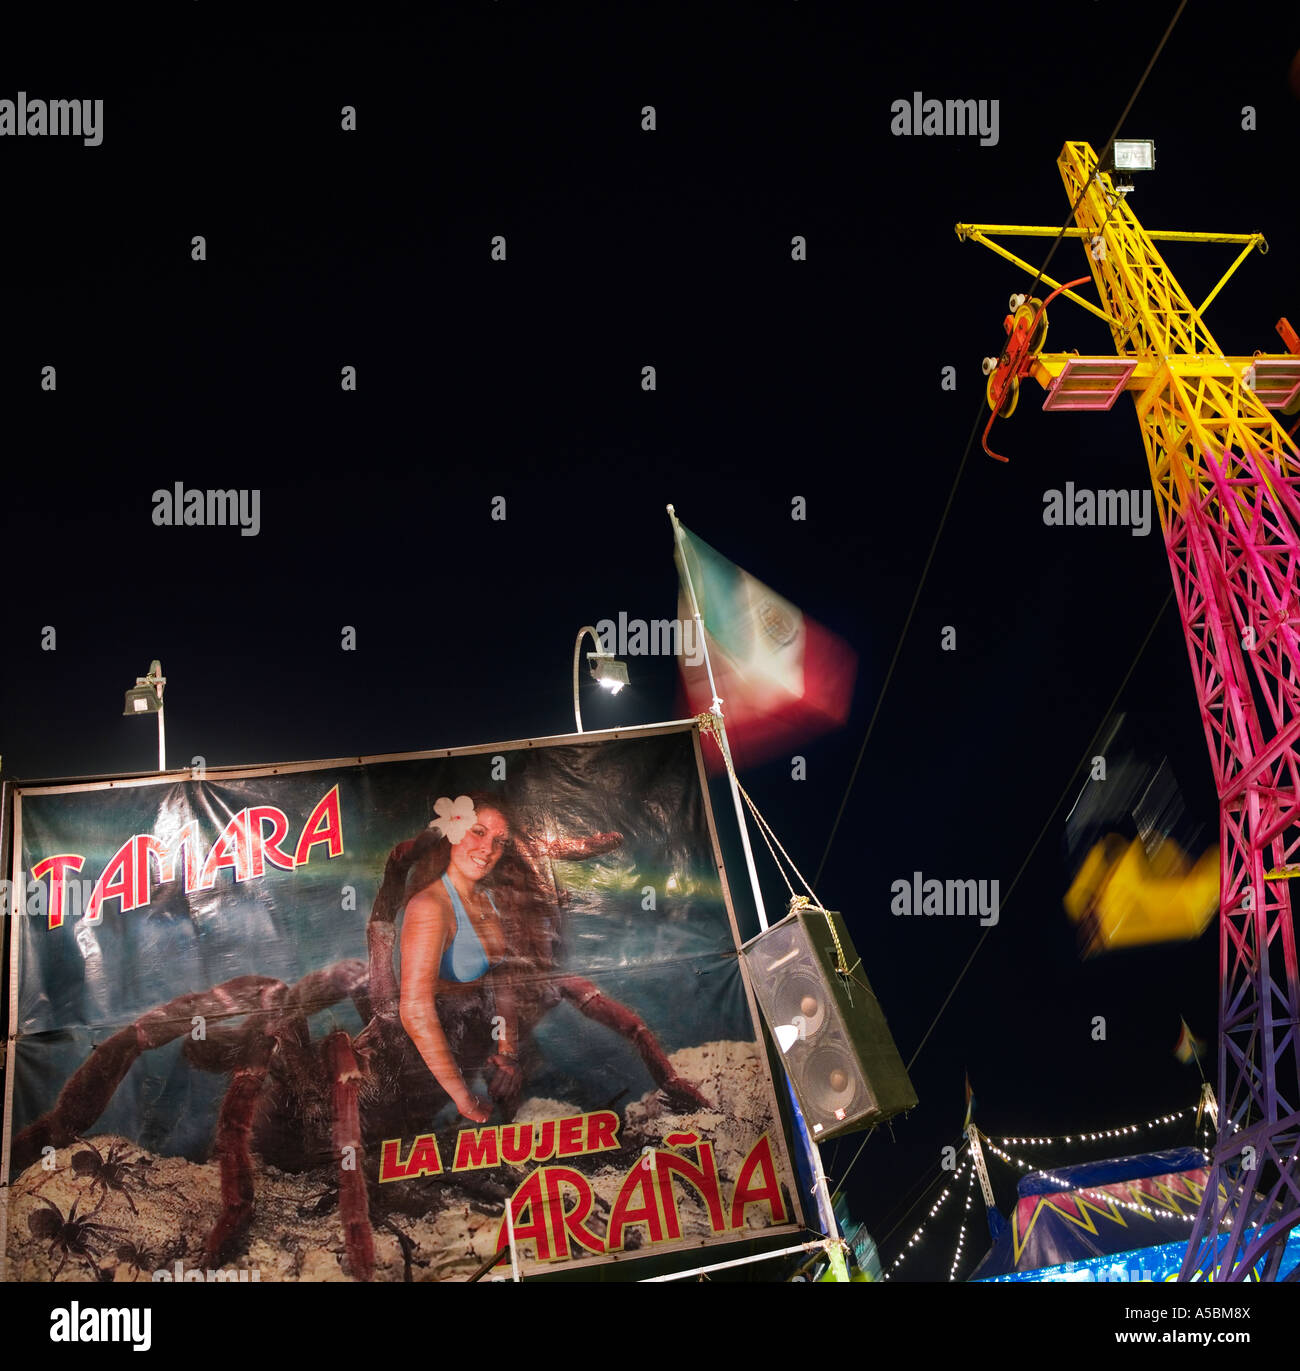 Spiderwoman funfair attraction at night in Mexico surreal weird unusual image concept greeting card idea Stock Photo